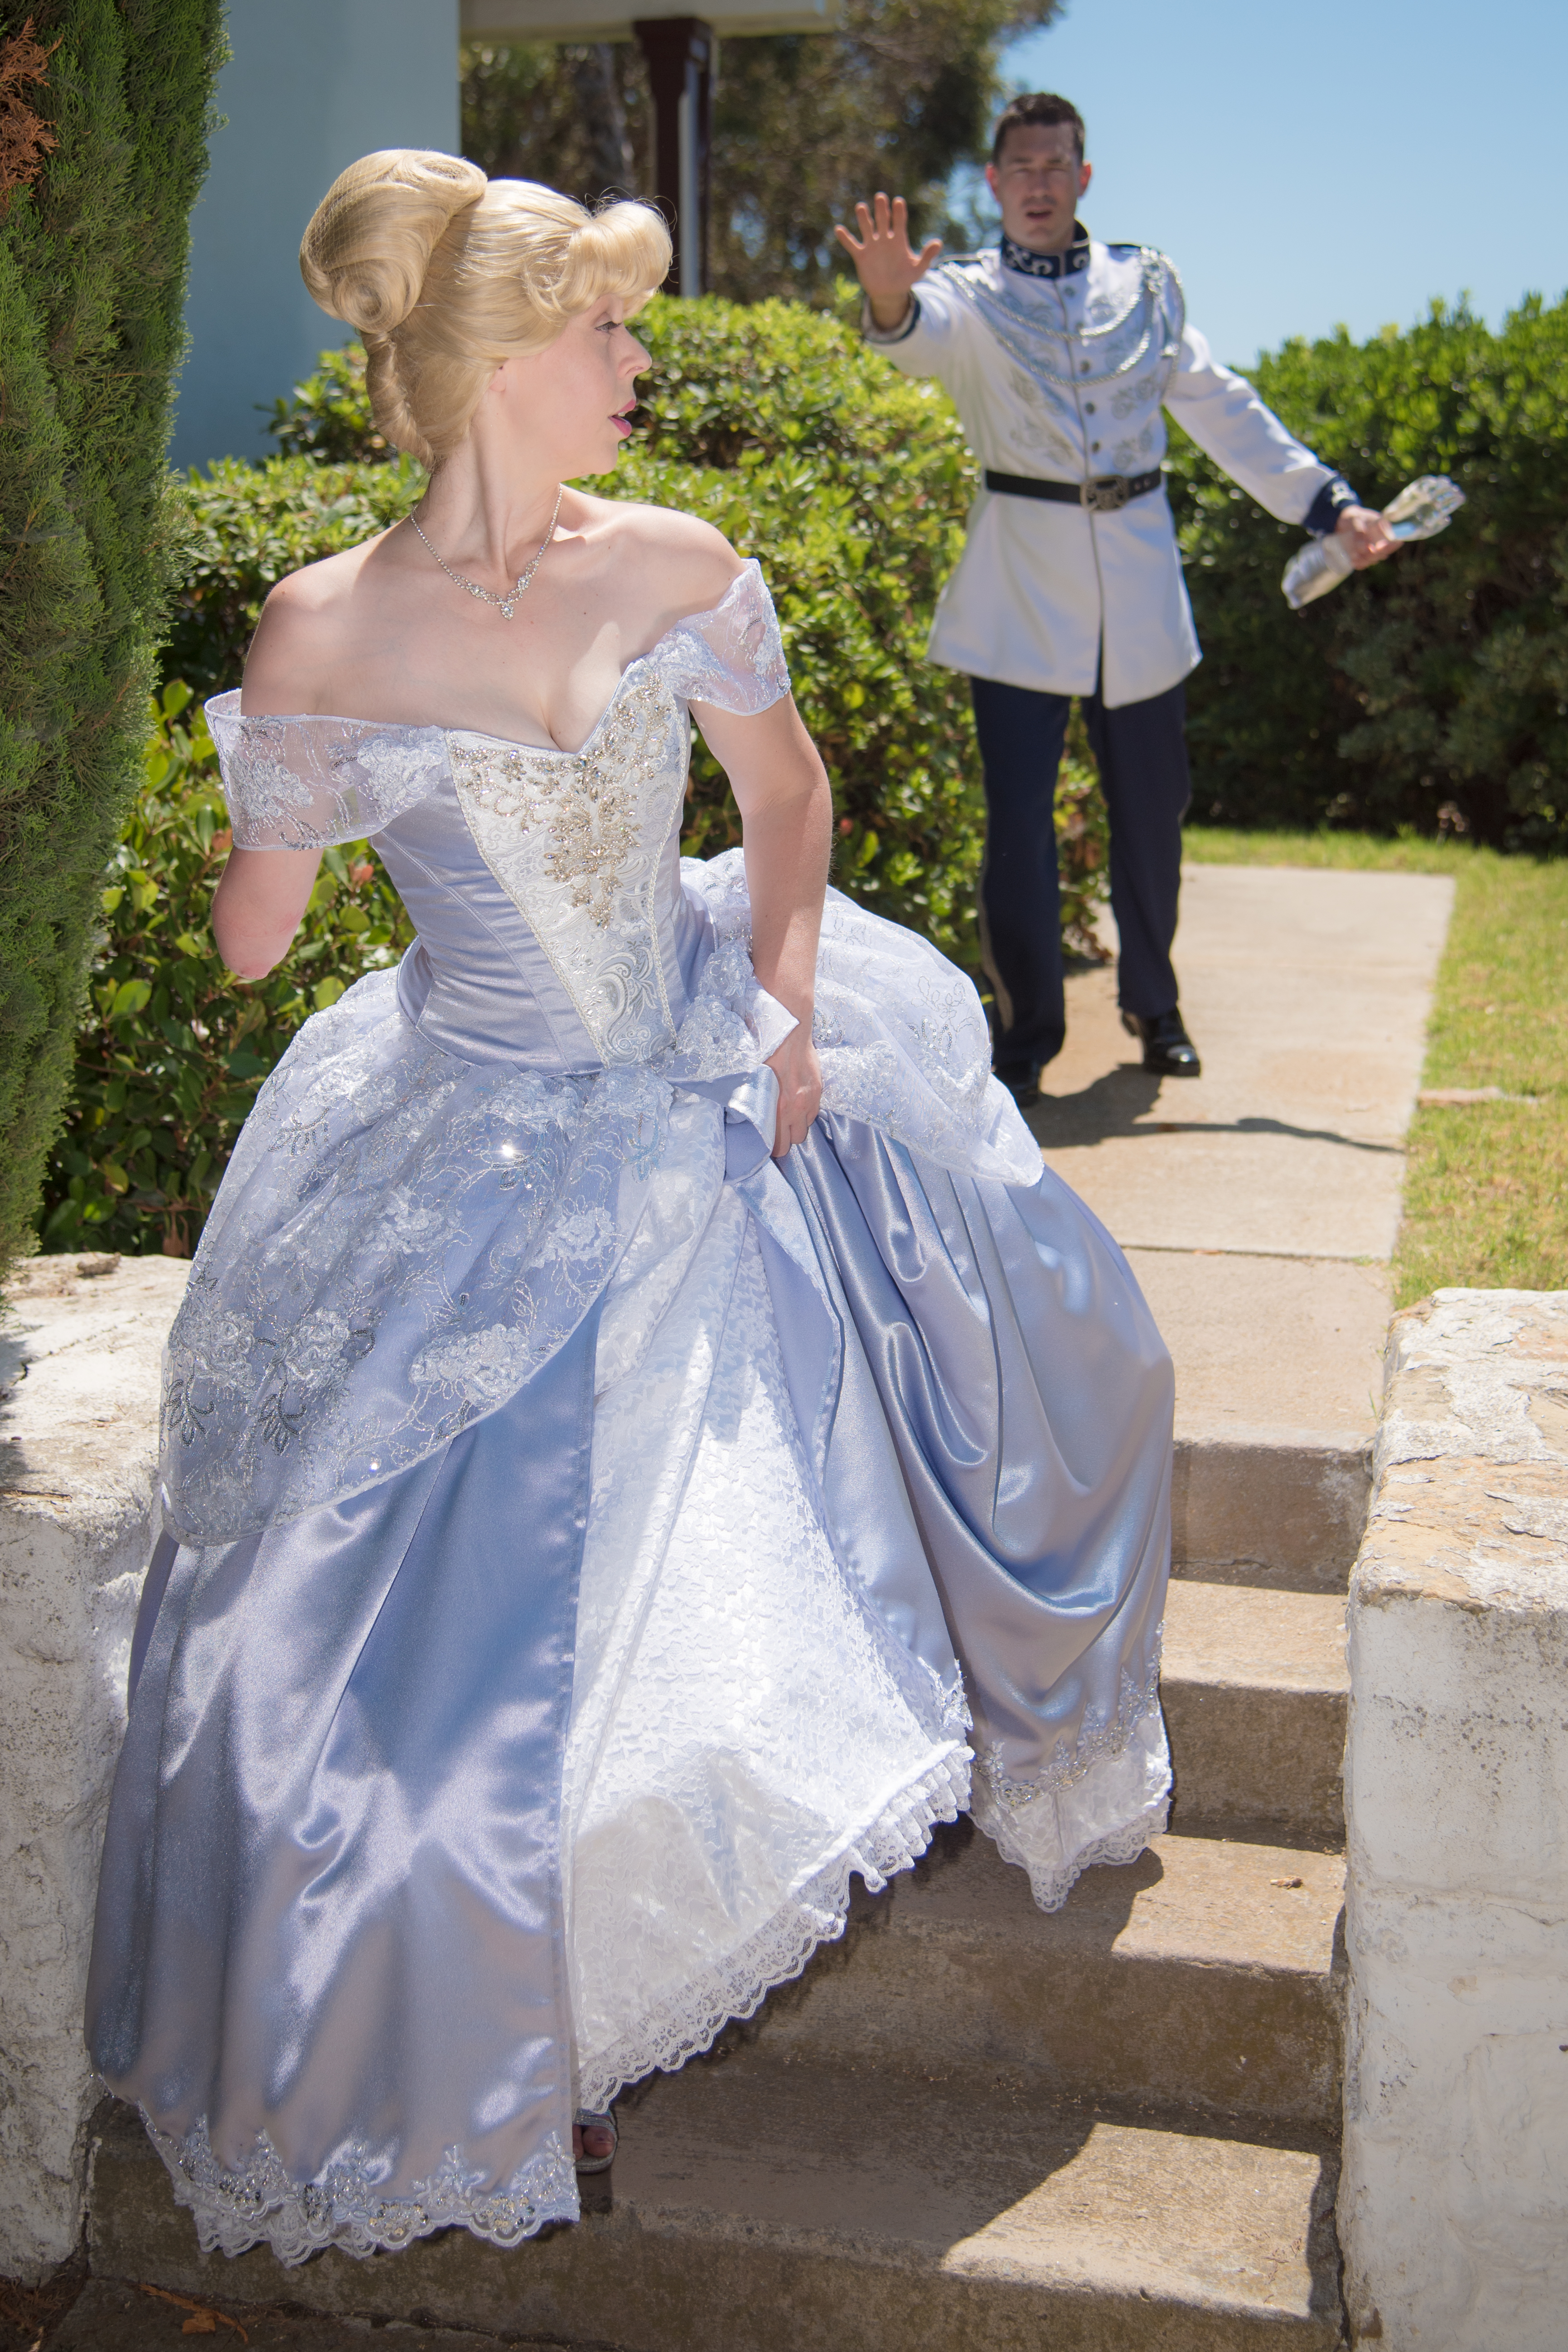 Mandy Pursley as Cinderella while Prince Charming chases her with missing glass arm